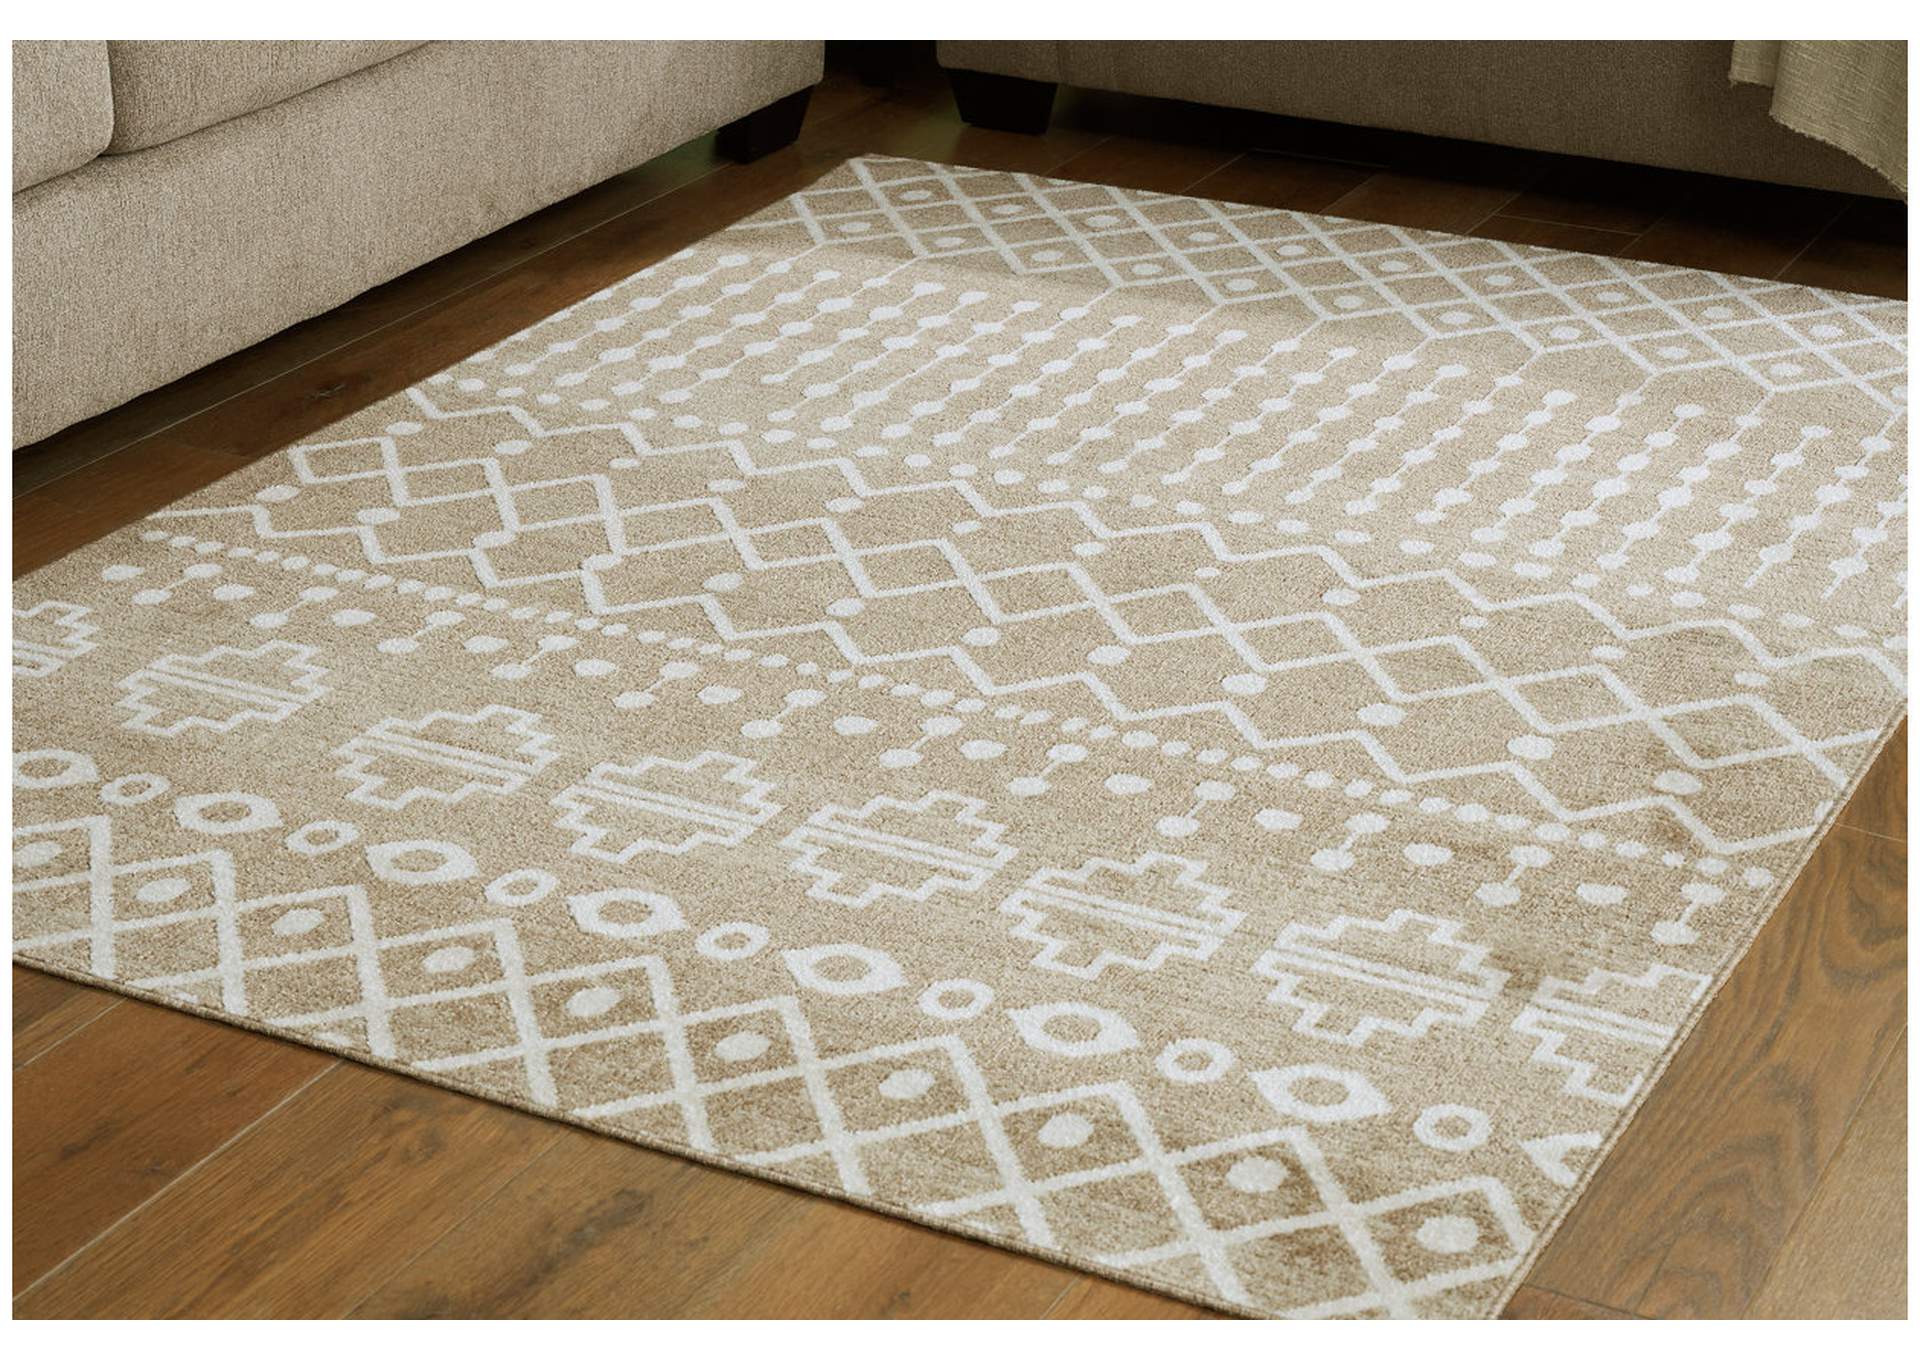 Bunchly 5' x 7' Rug,Signature Design By Ashley